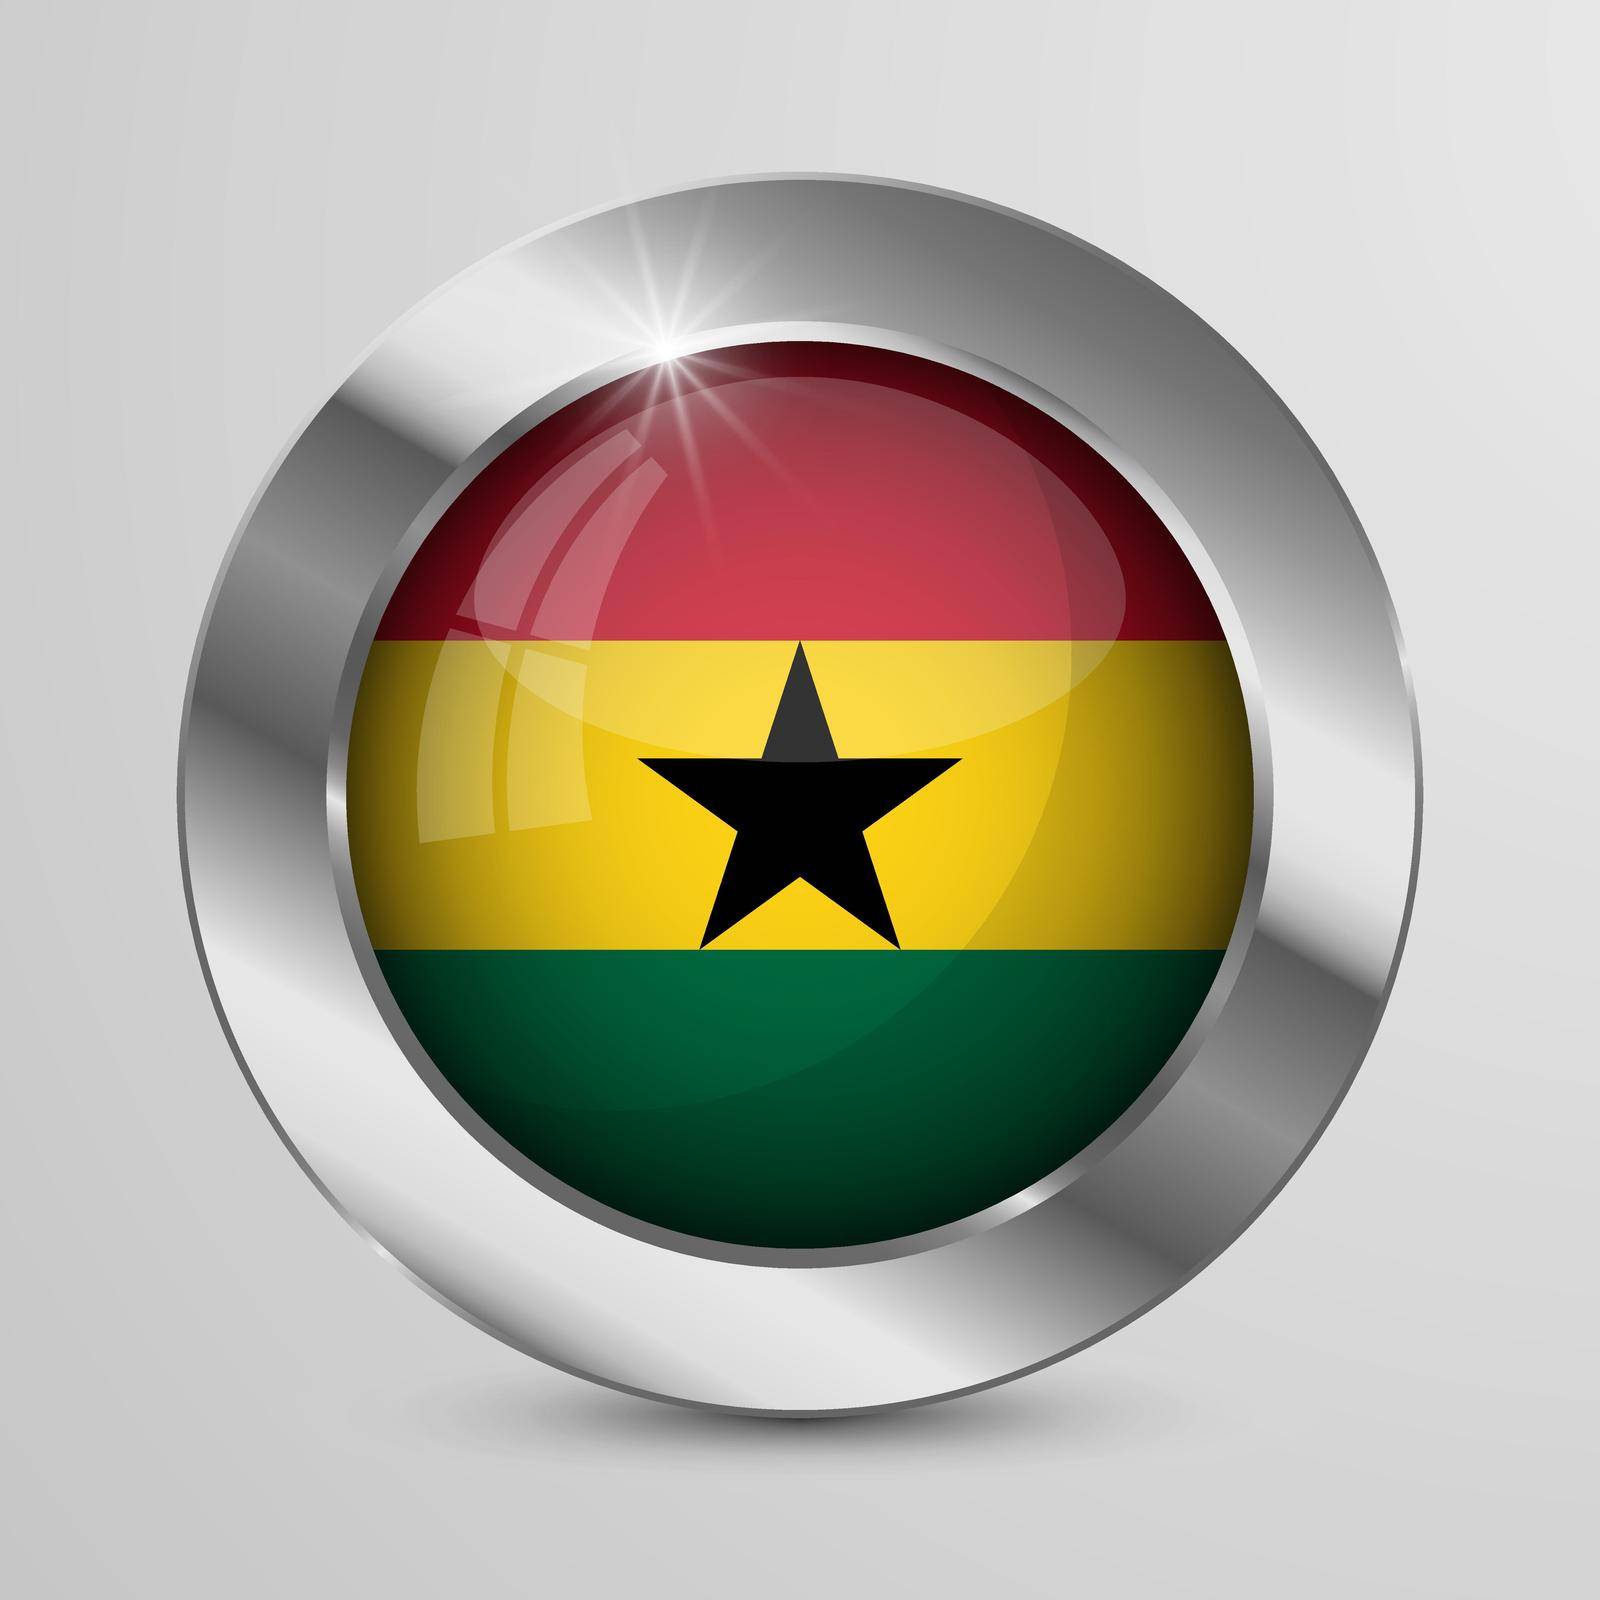 EPS10 Vector Patriotic Button with Ghana flag colors. An element of impact for the use you want to make of it.